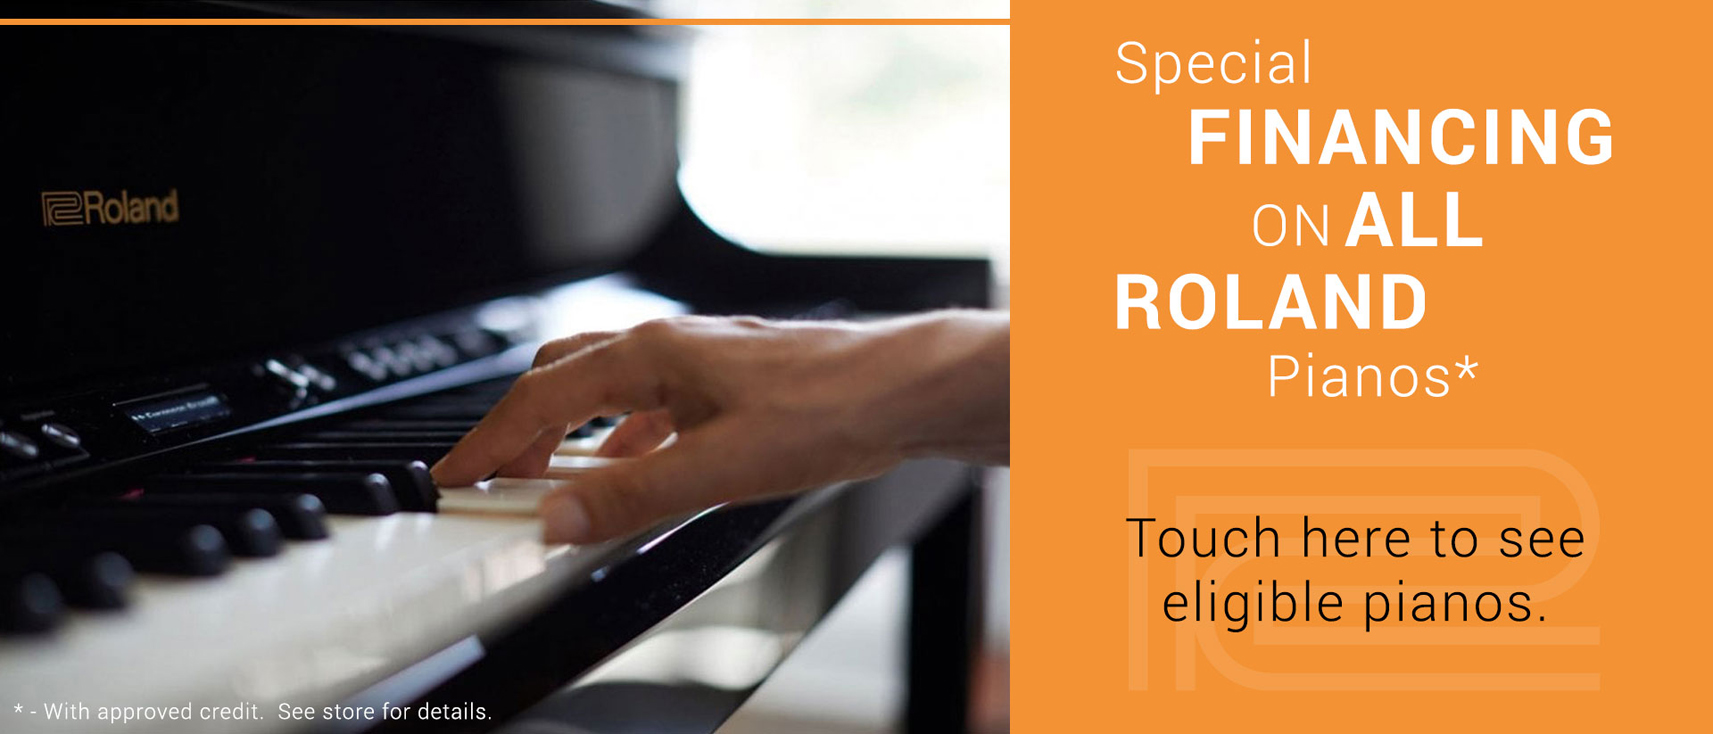 Special Financing Offer on Roland